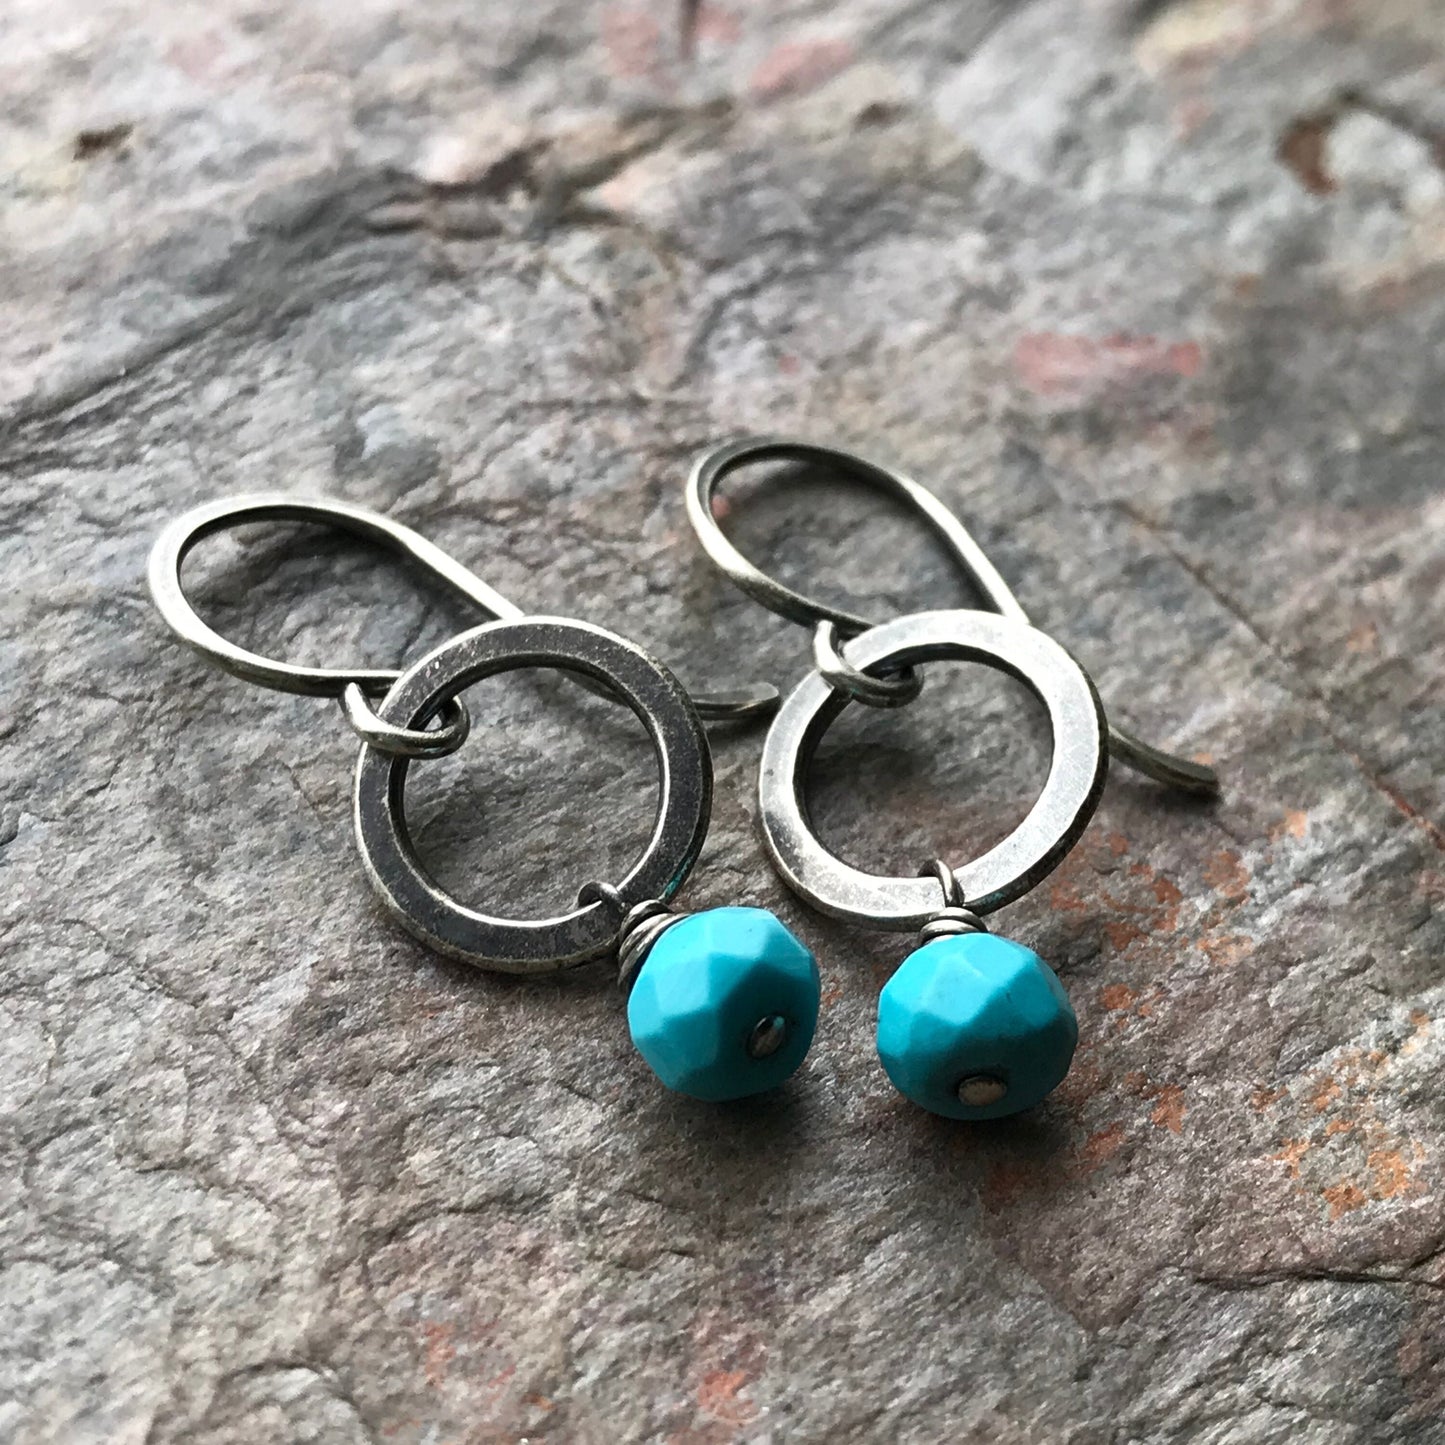 Turquoise Sterling Silver Earrings - Faceted Turquoise on Dainty Sterling Silver Circles